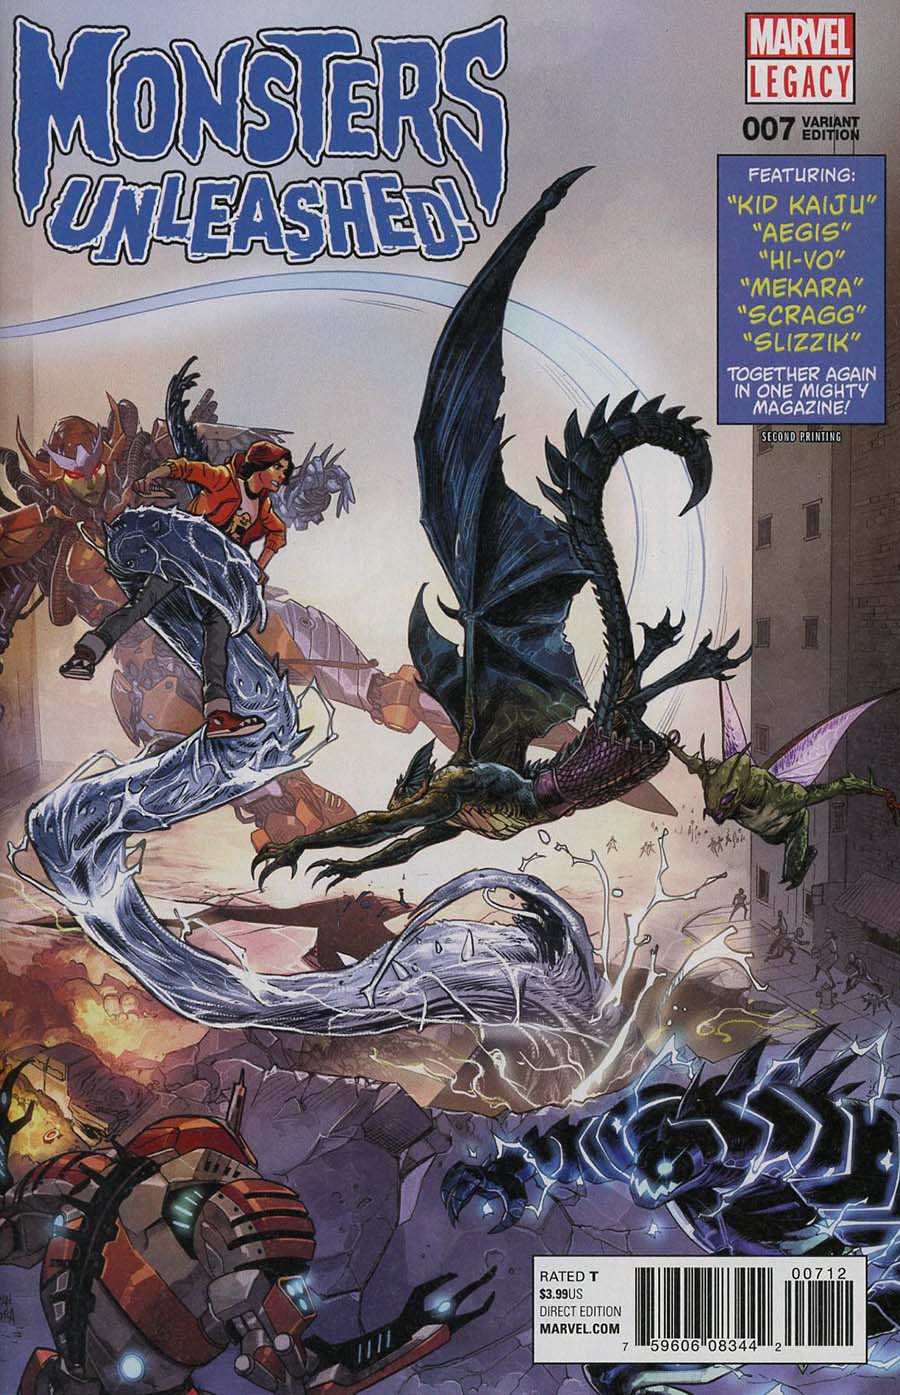 Monsters Unleashed Vol 2 #7 Cover D 2nd Ptg Variant Dan Mora Cover (Marvel Legacy Tie-In)